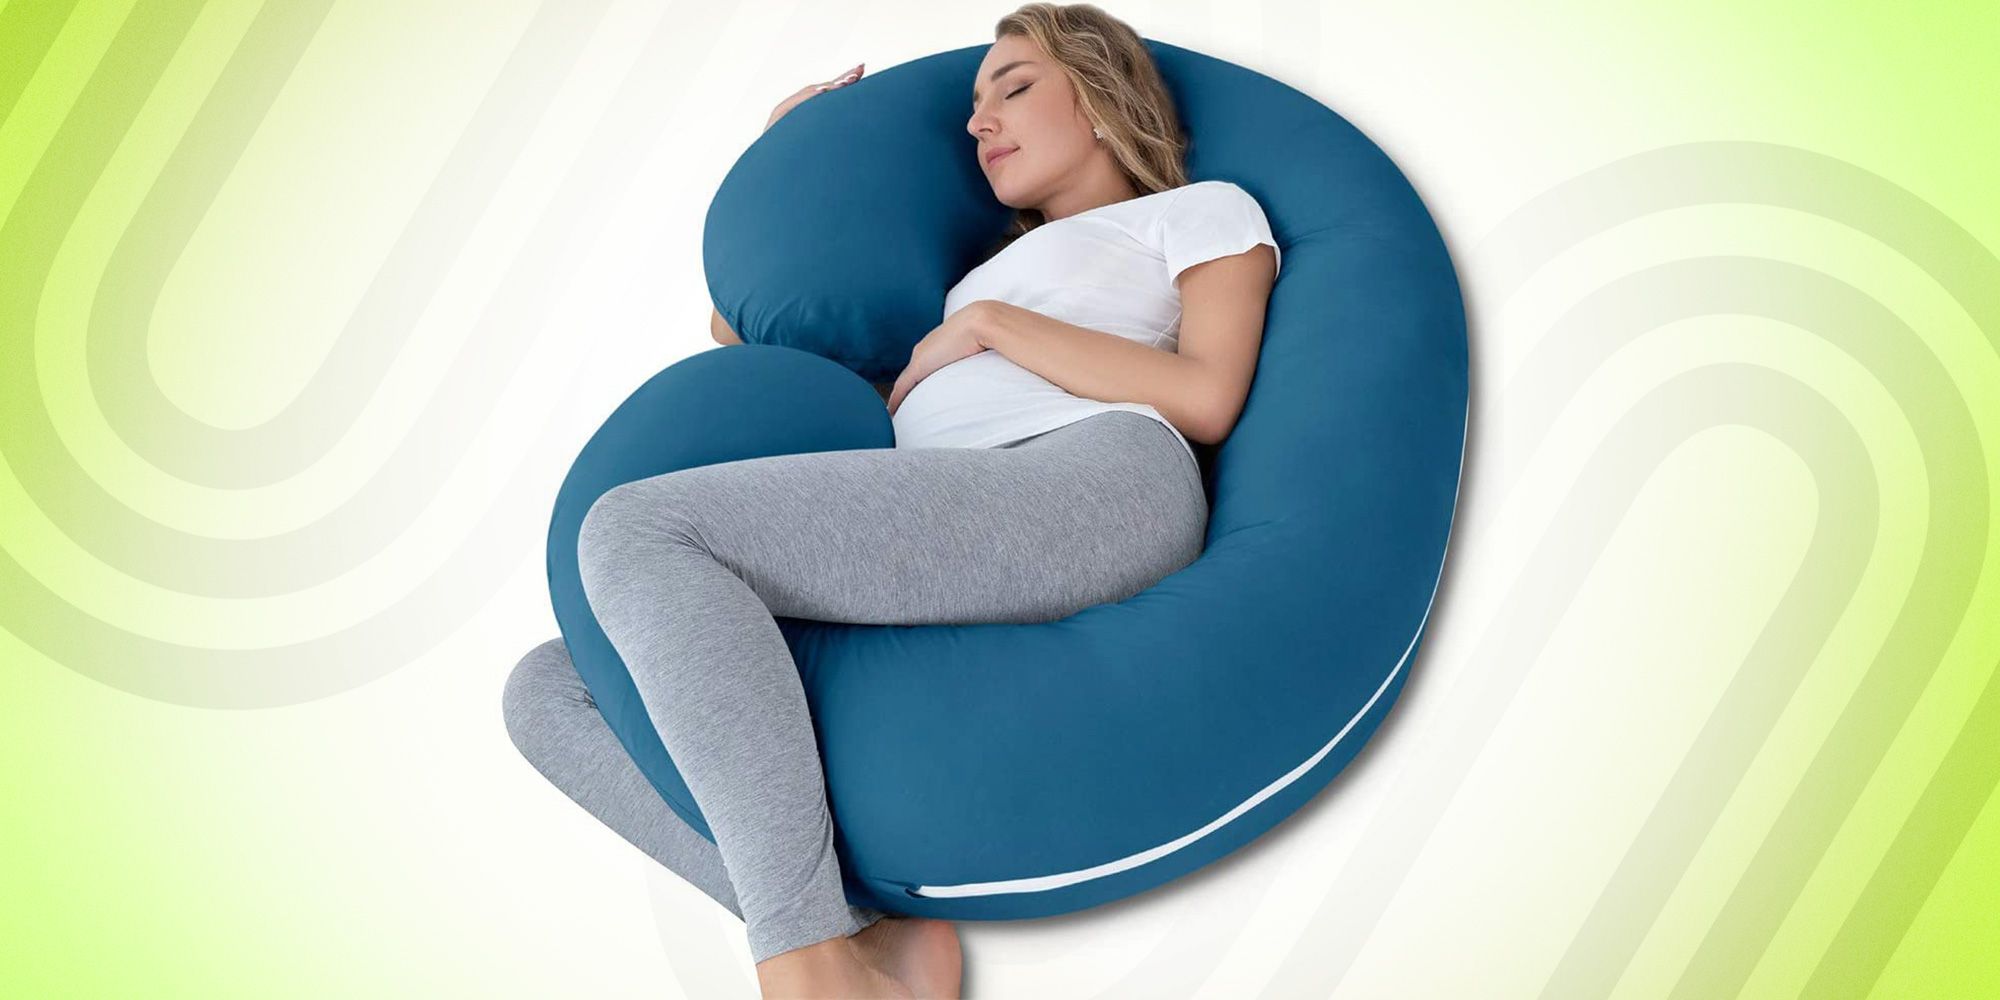 Sleep Like a Baby Bub: The Best Pregnancy Pillow for Women - Maternity  Pillows for Sleeping, Wedge, Belly, Side Sleeper Support - Baby Pillow and  Bed